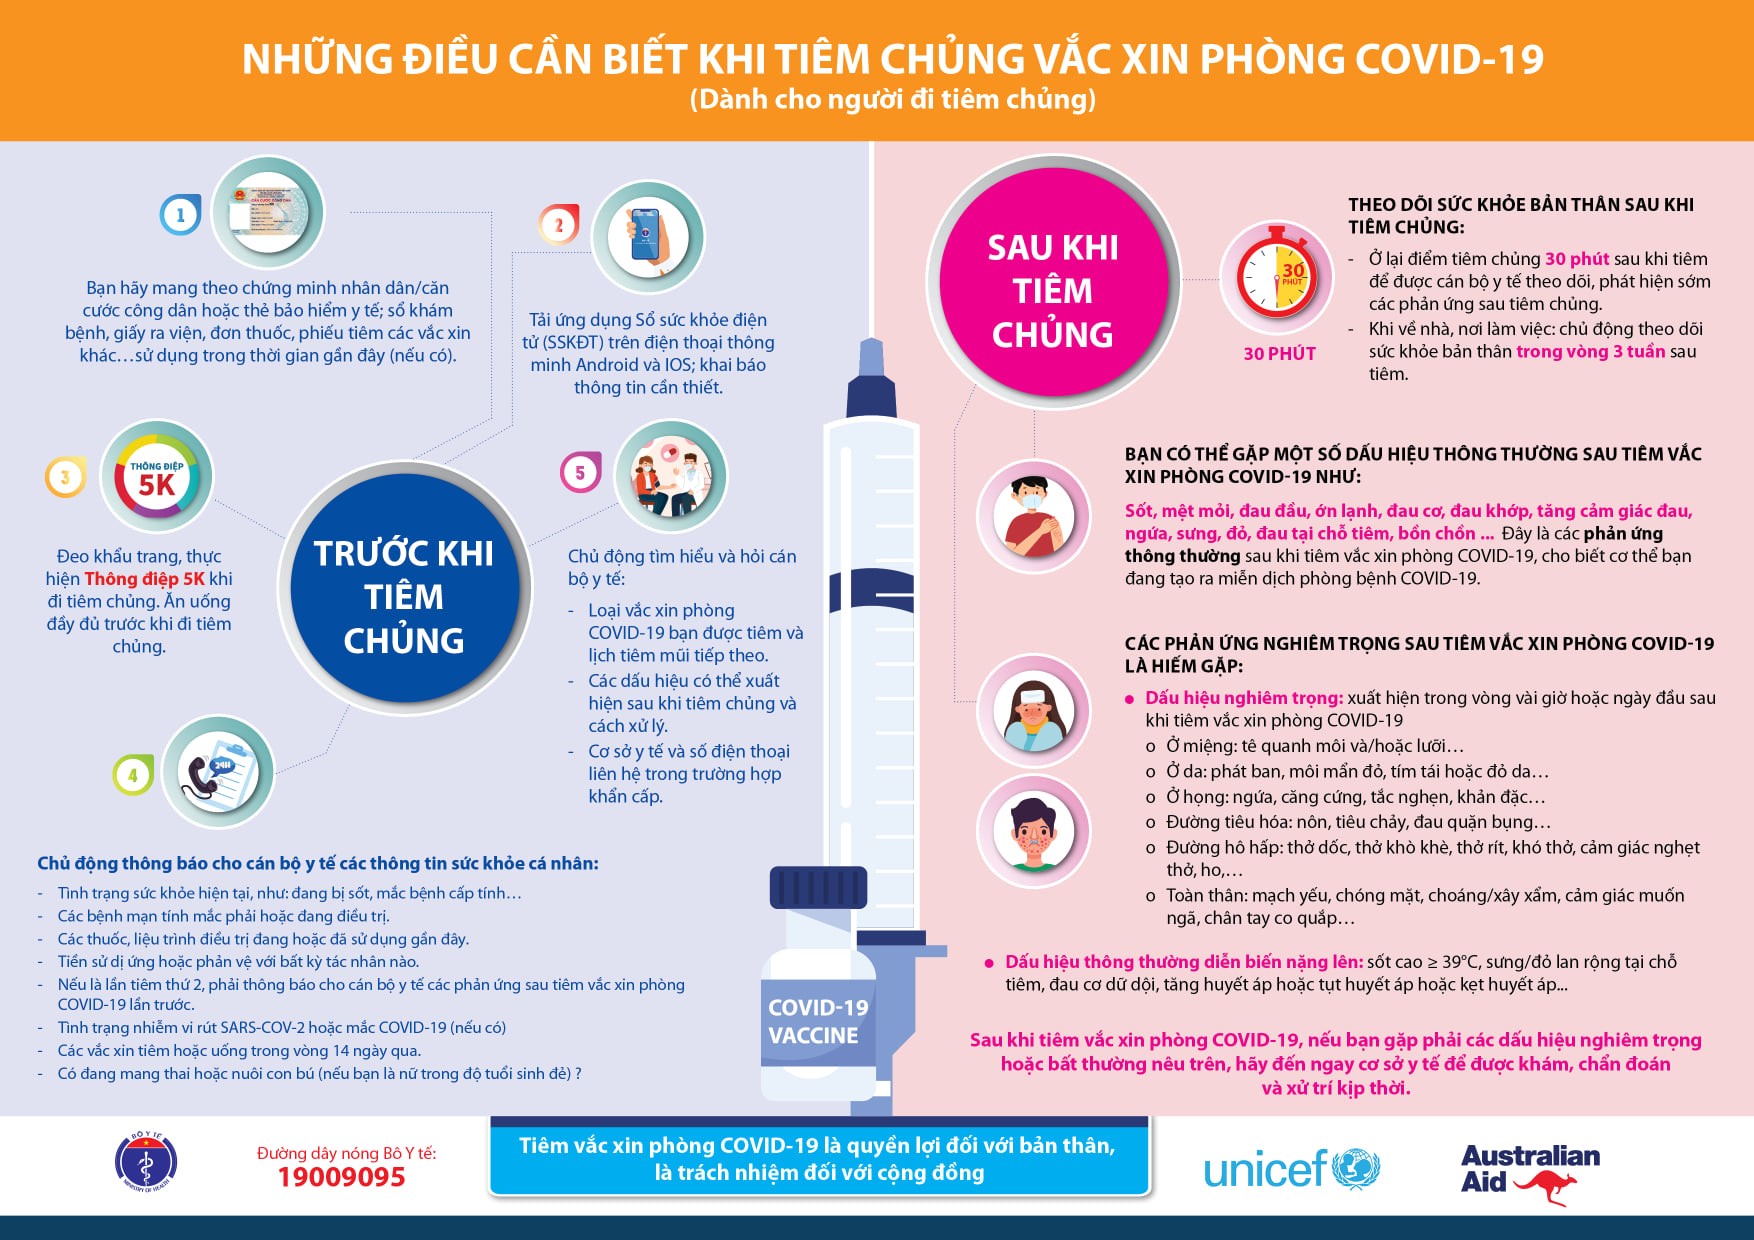 What to know when getting Covid – 19 vaccine according to regulations of Ministry of Health - Figure: Internet